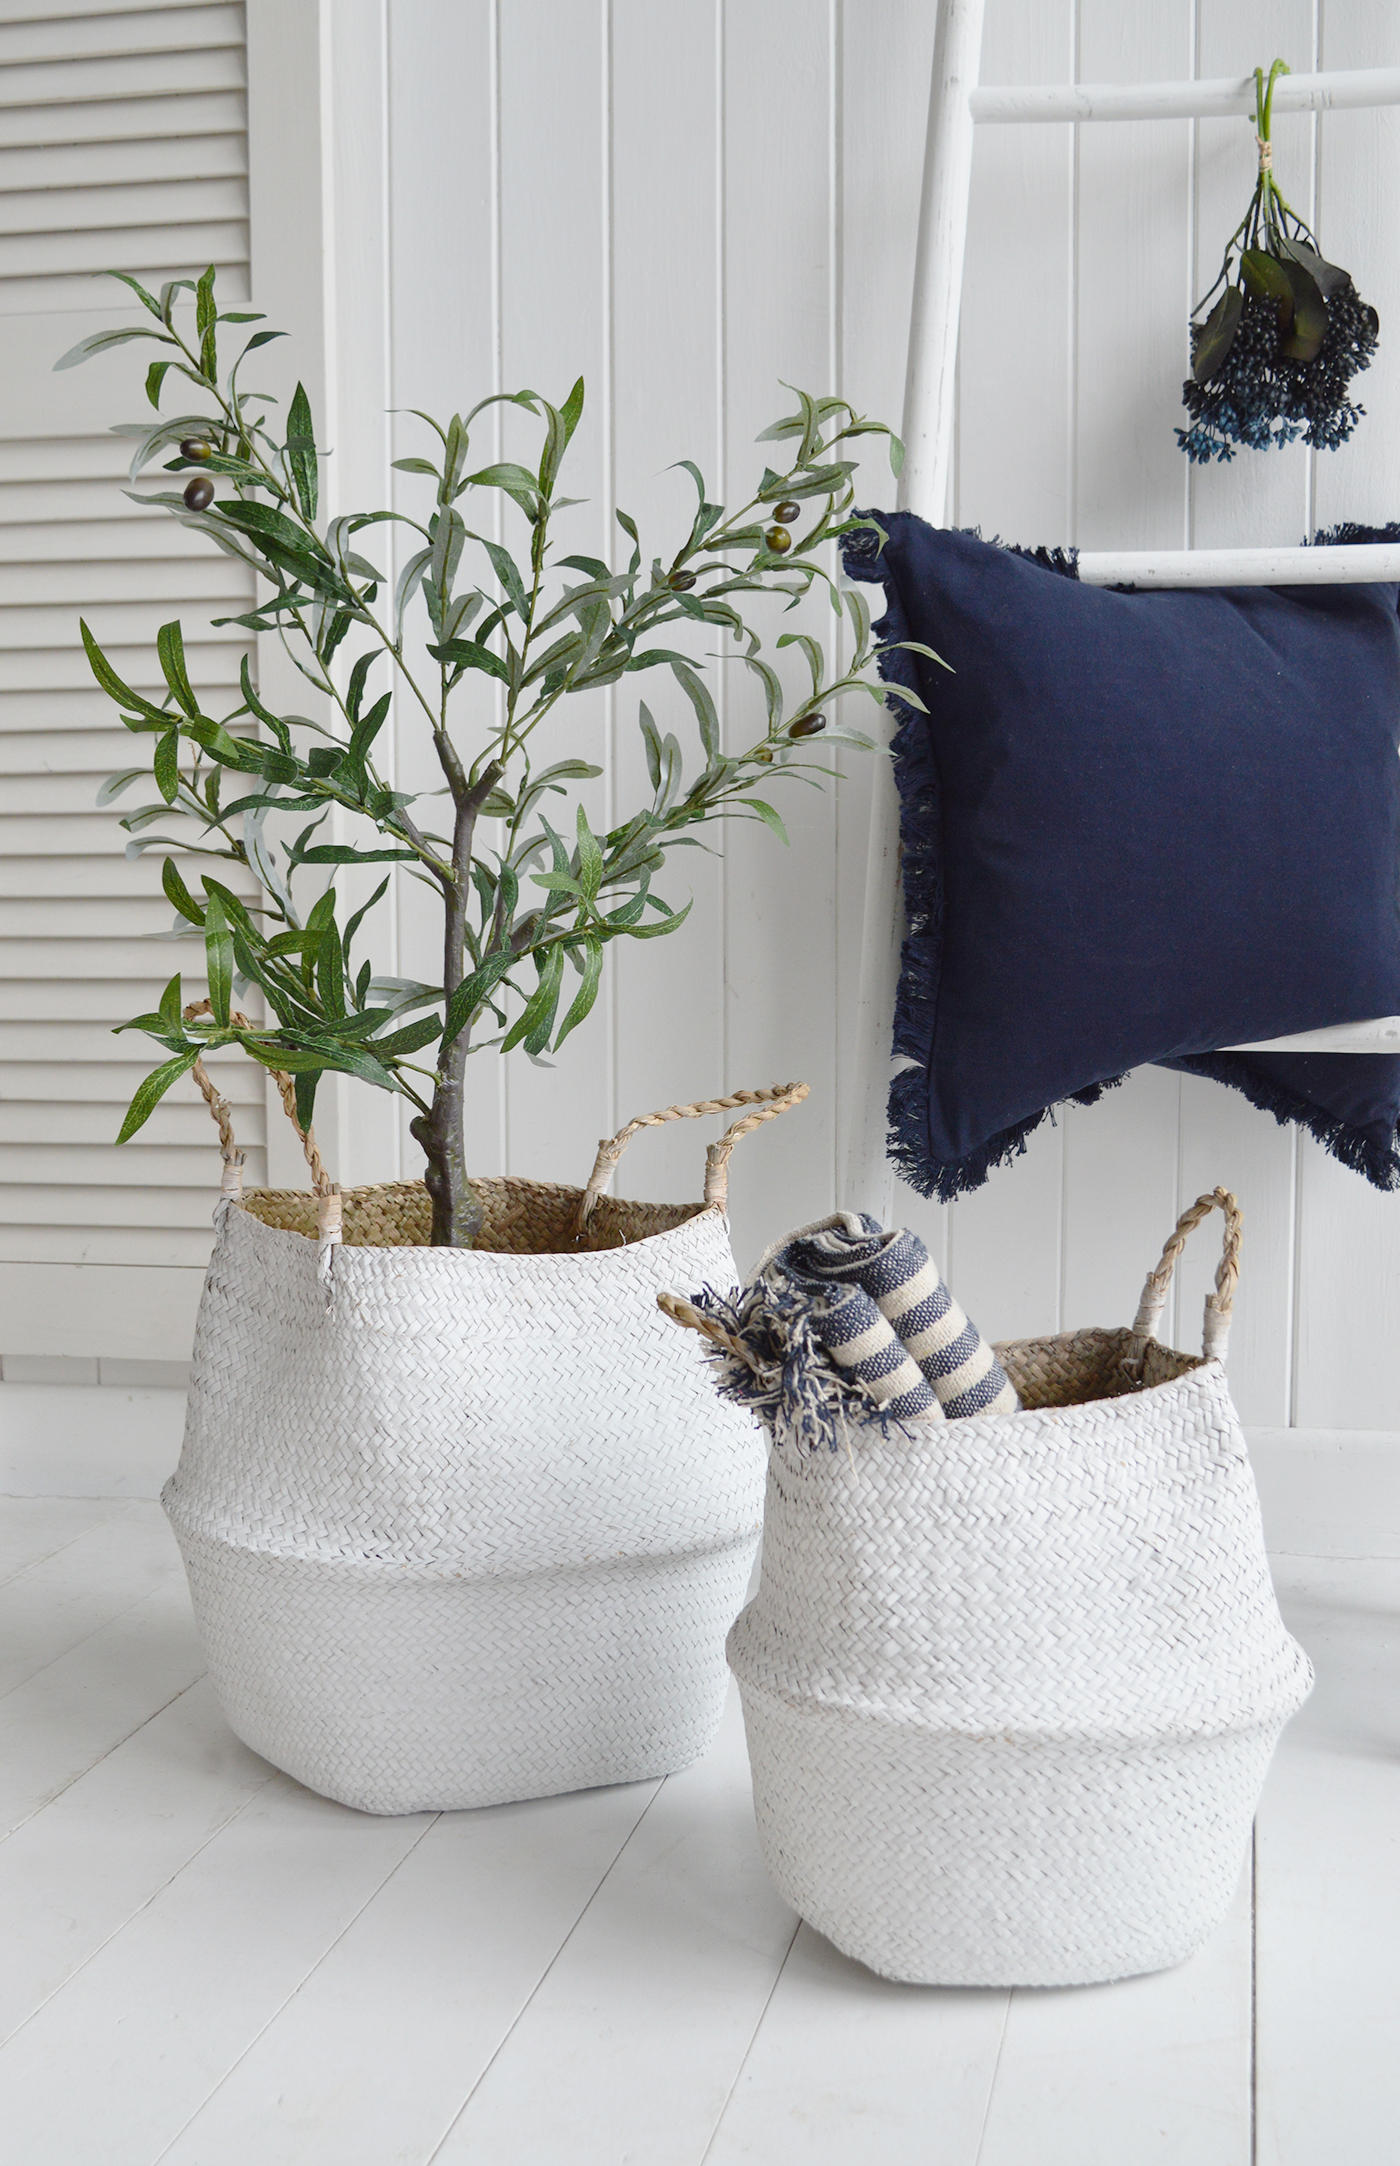 The White Kingston baskets with the faux olive tree and throws